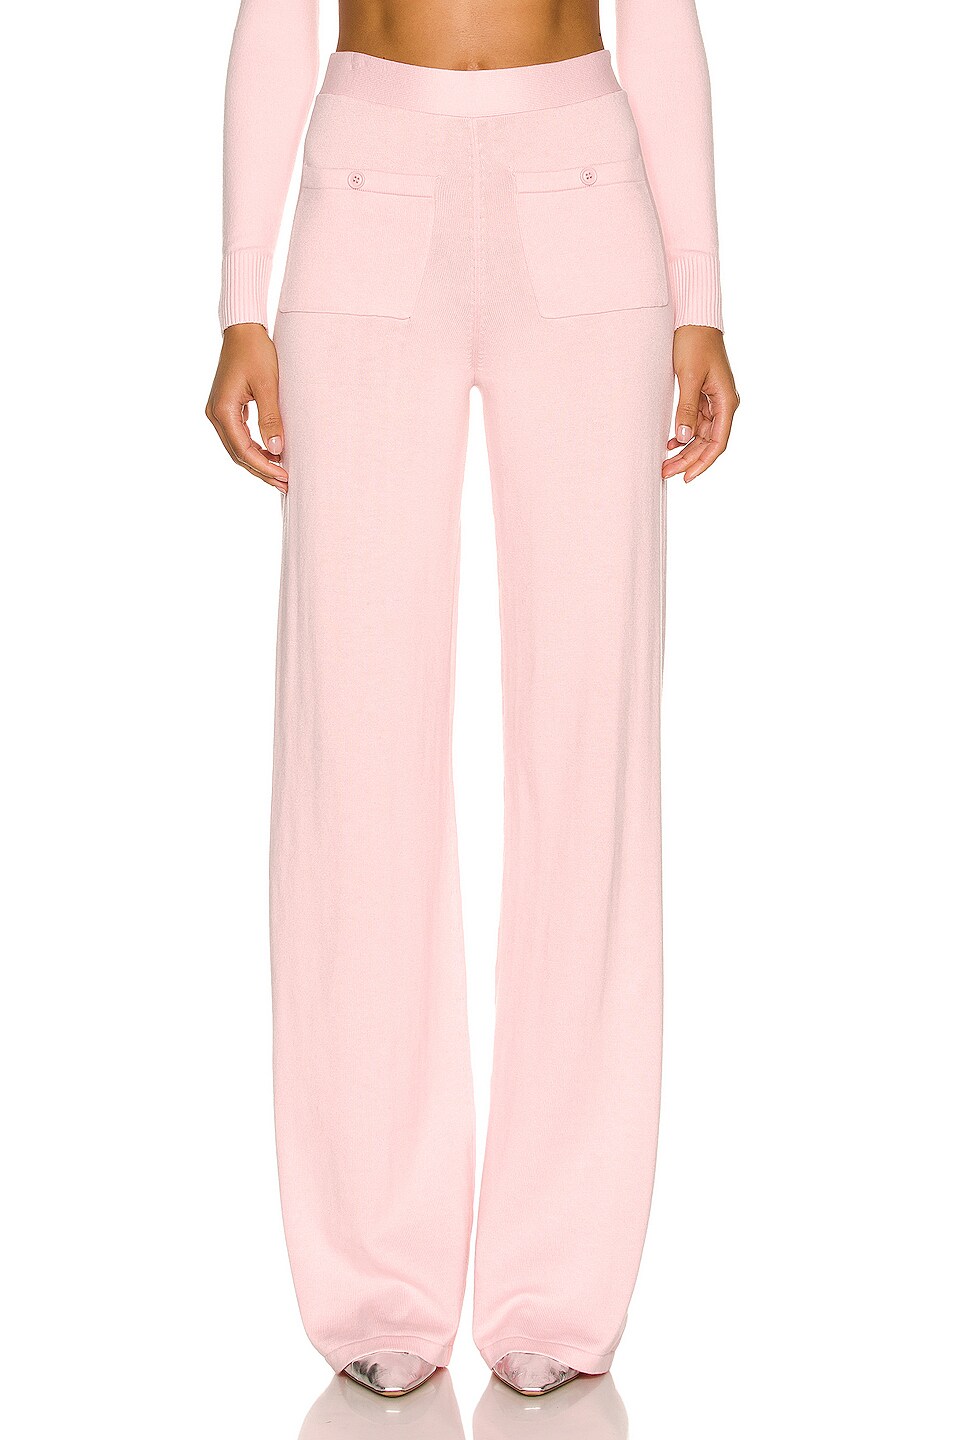 Image 1 of JoosTricot Lounge Pants in Blush